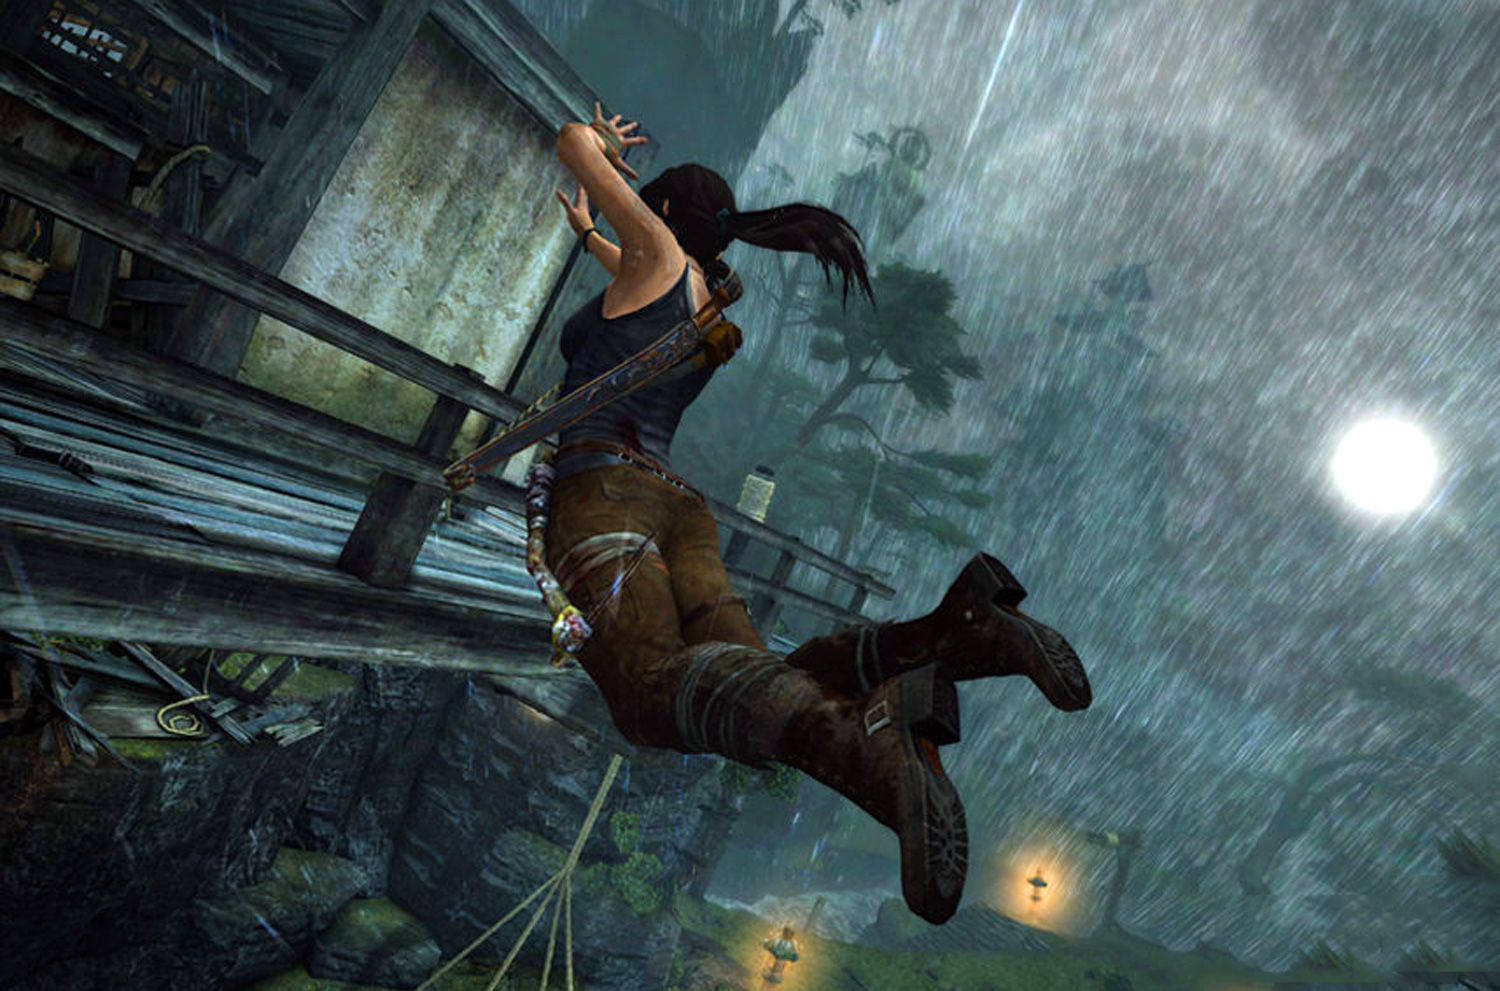 Tomb Raider on X: 10 years ago today Tomb Raider (2013) launched